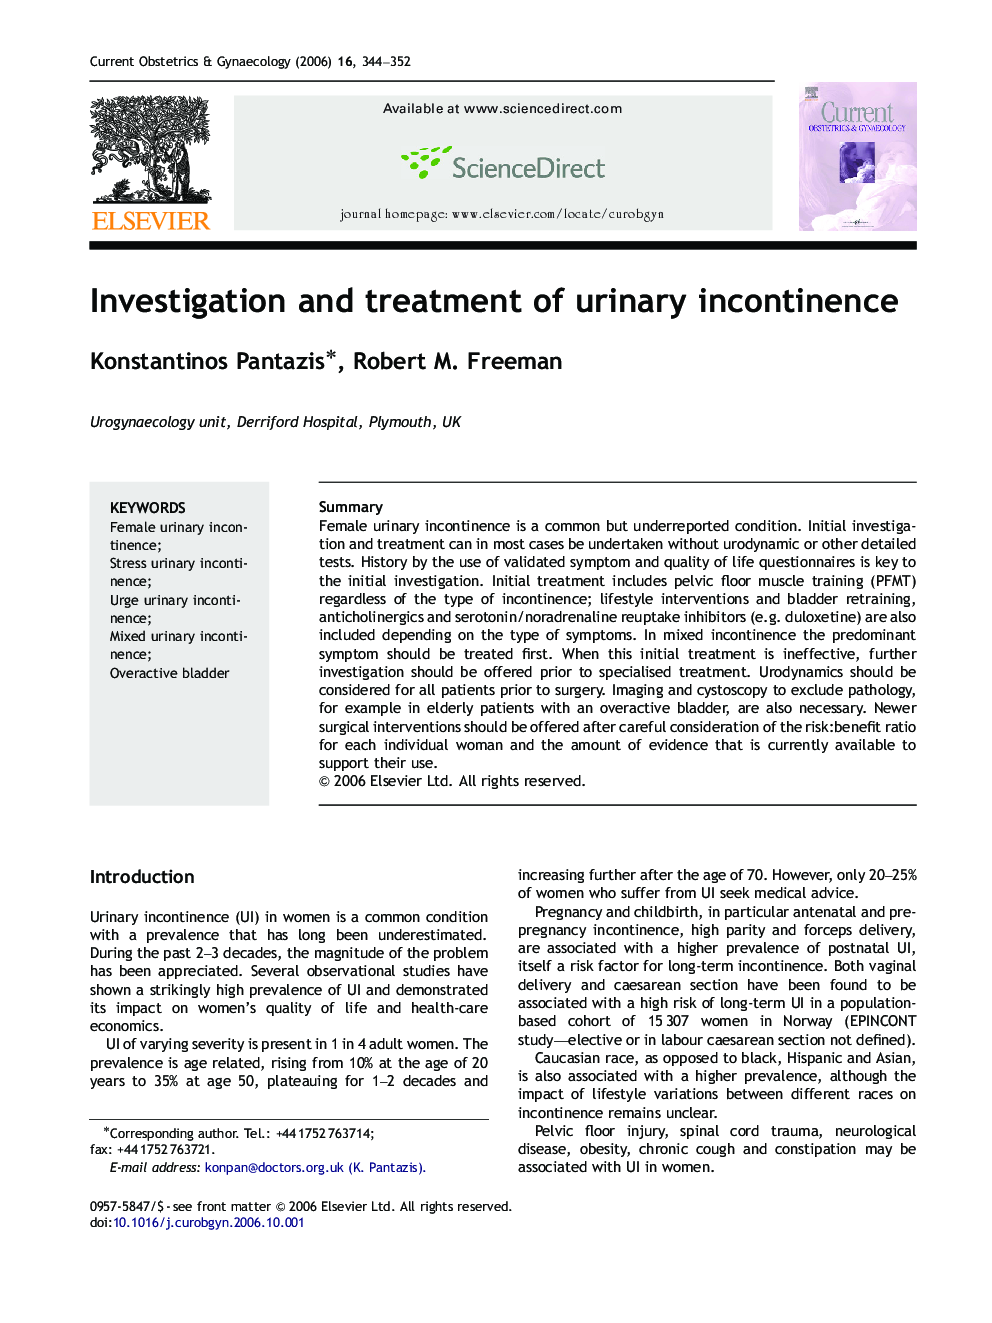 Investigation and treatment of urinary incontinence